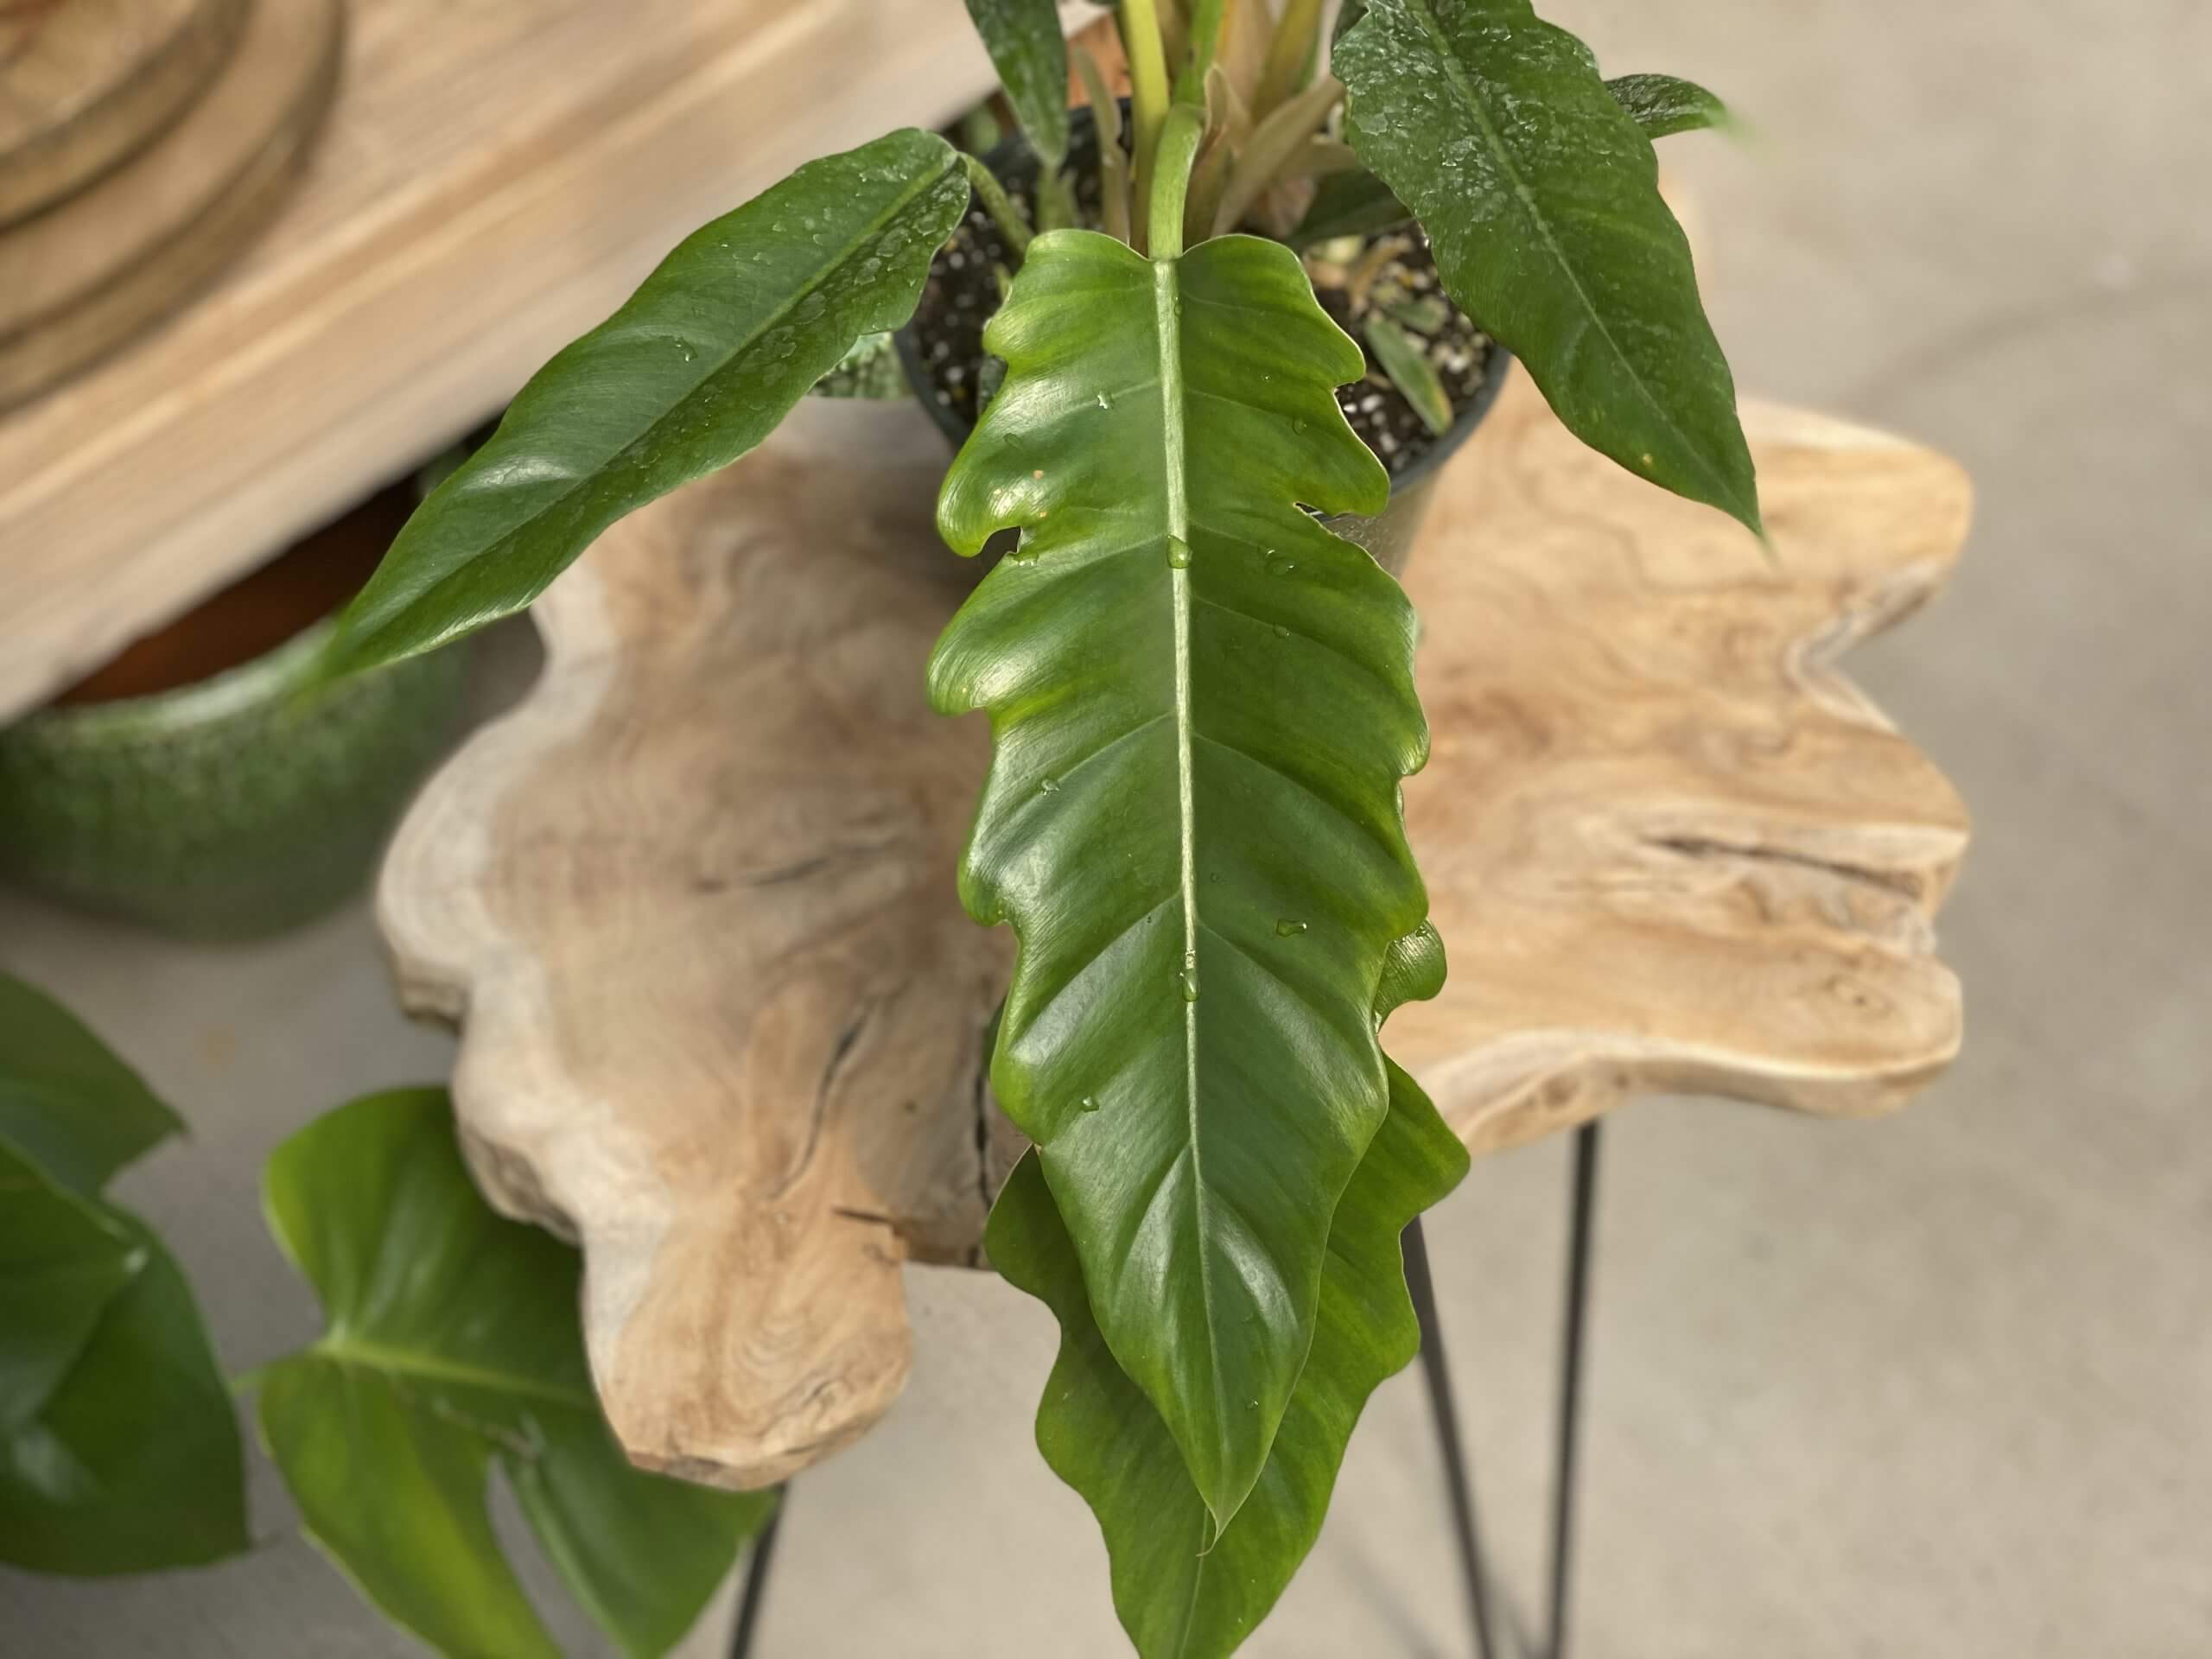 How to Care for These Philodendron Indoor Plants